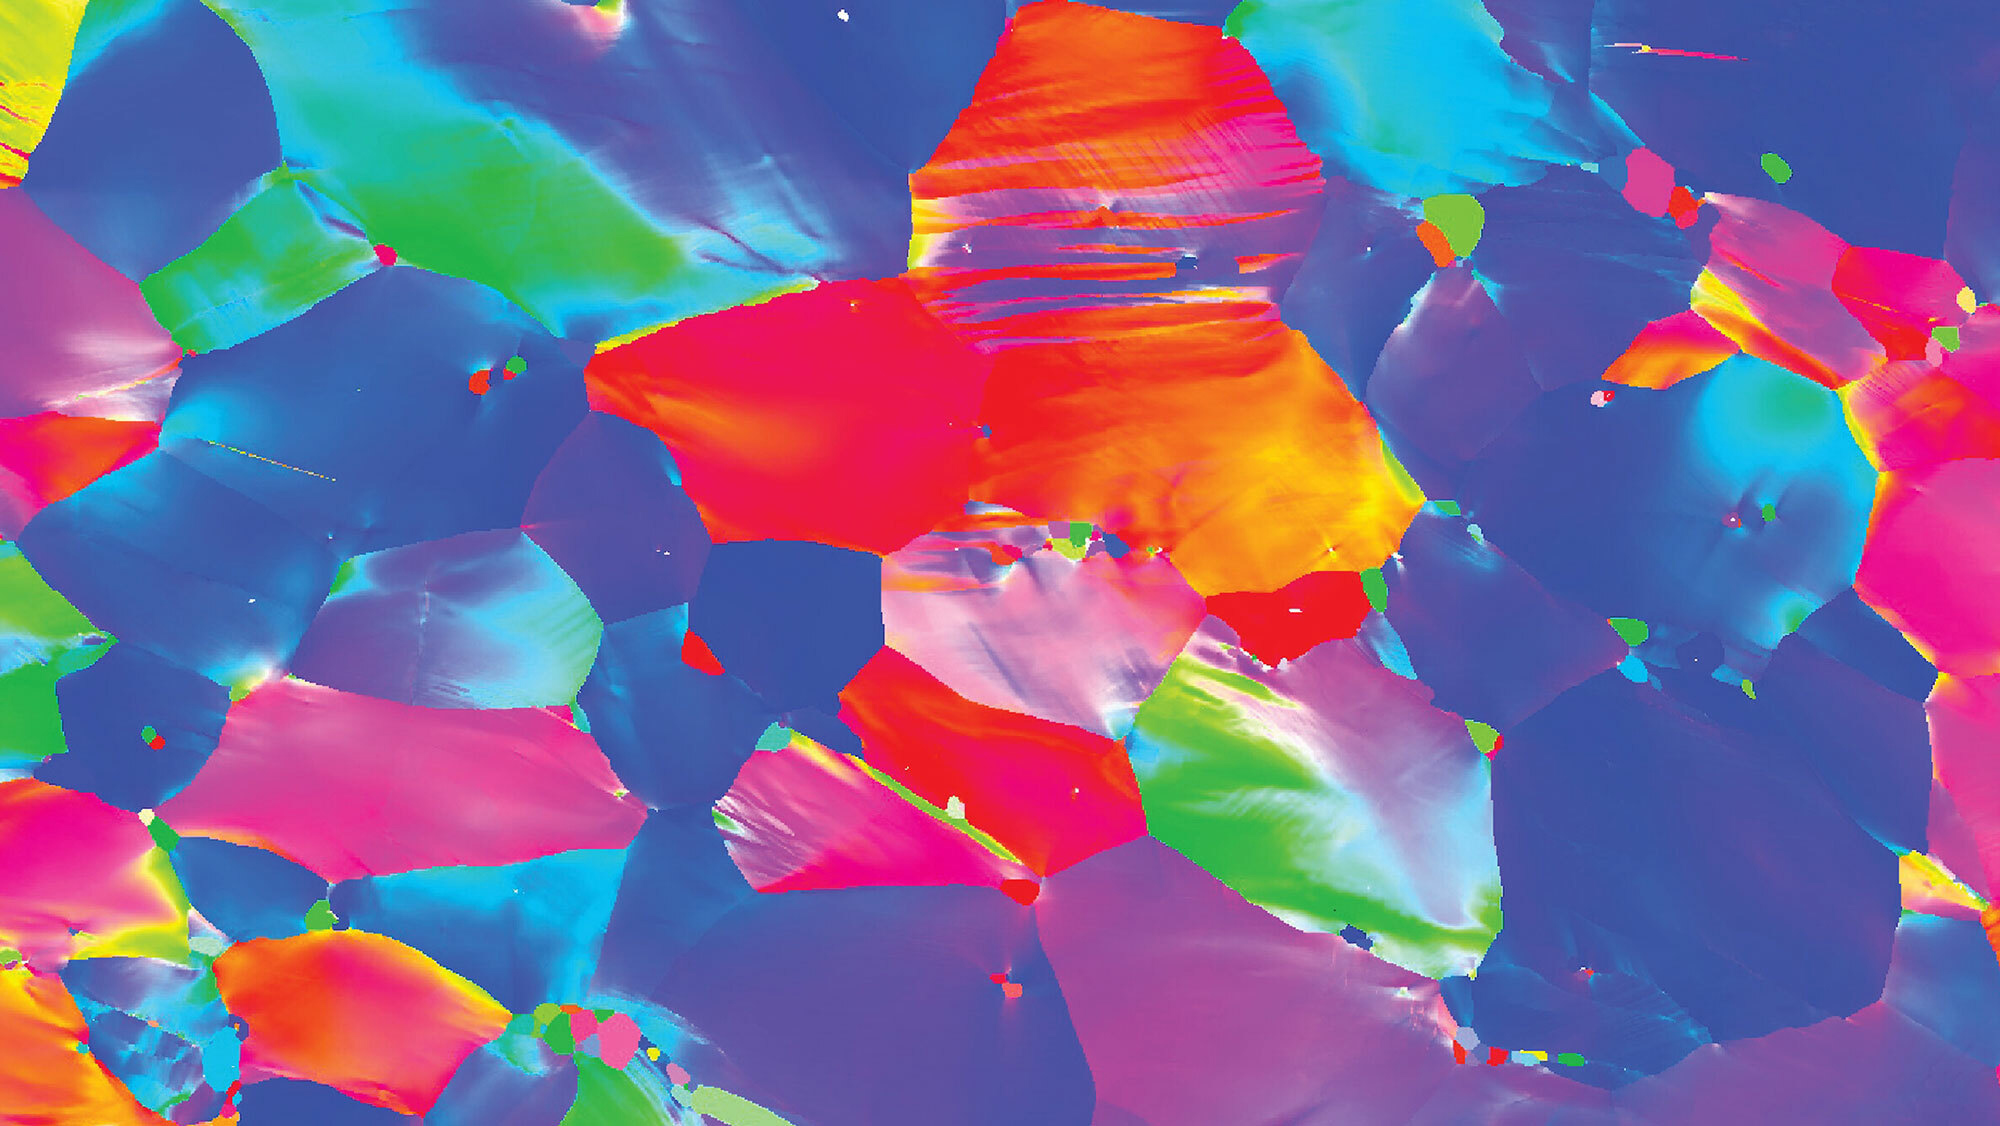 A field of pink, purple, cyan, indigo, orange and yellow shapes packed together, resembling vibrant abstract art.